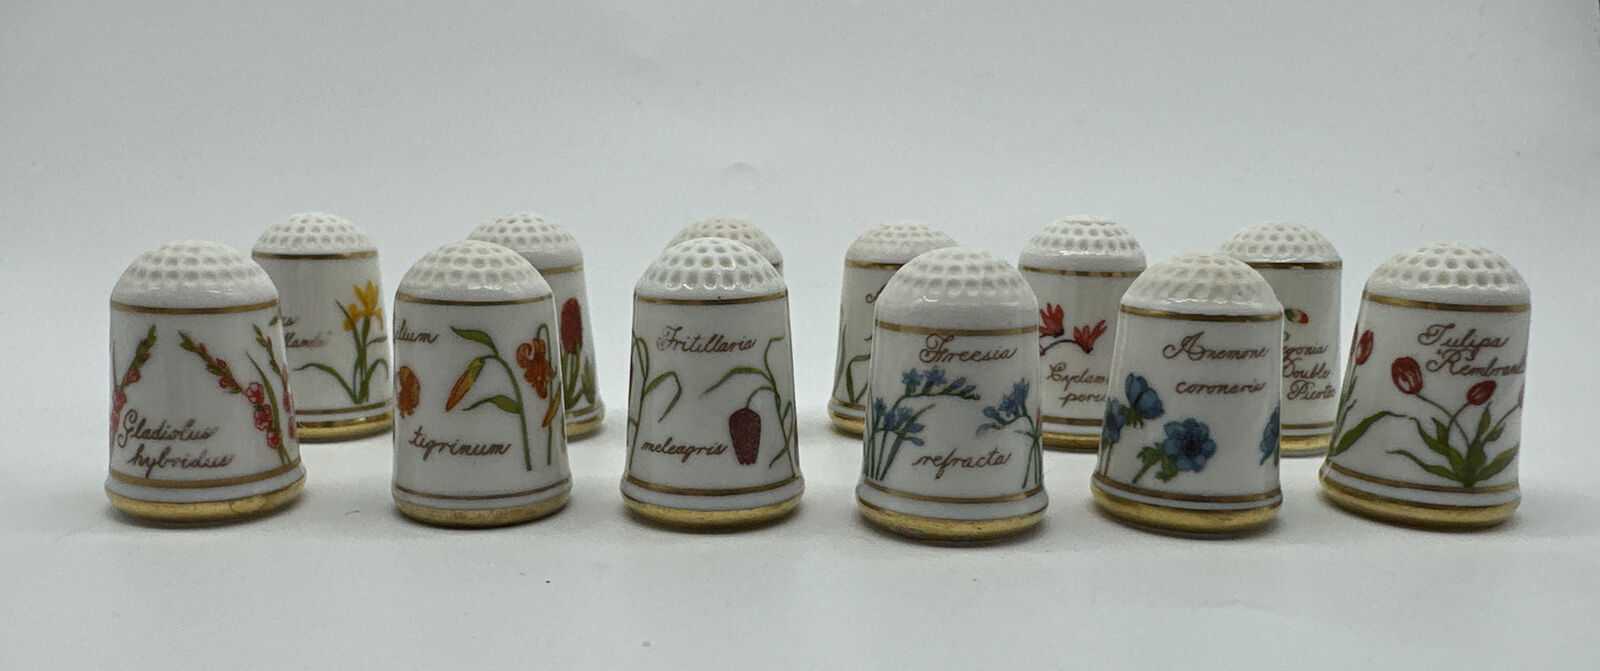 Vintage 1978 Franklin Porselein Flowers of Holland Thimbles Collection Set 12